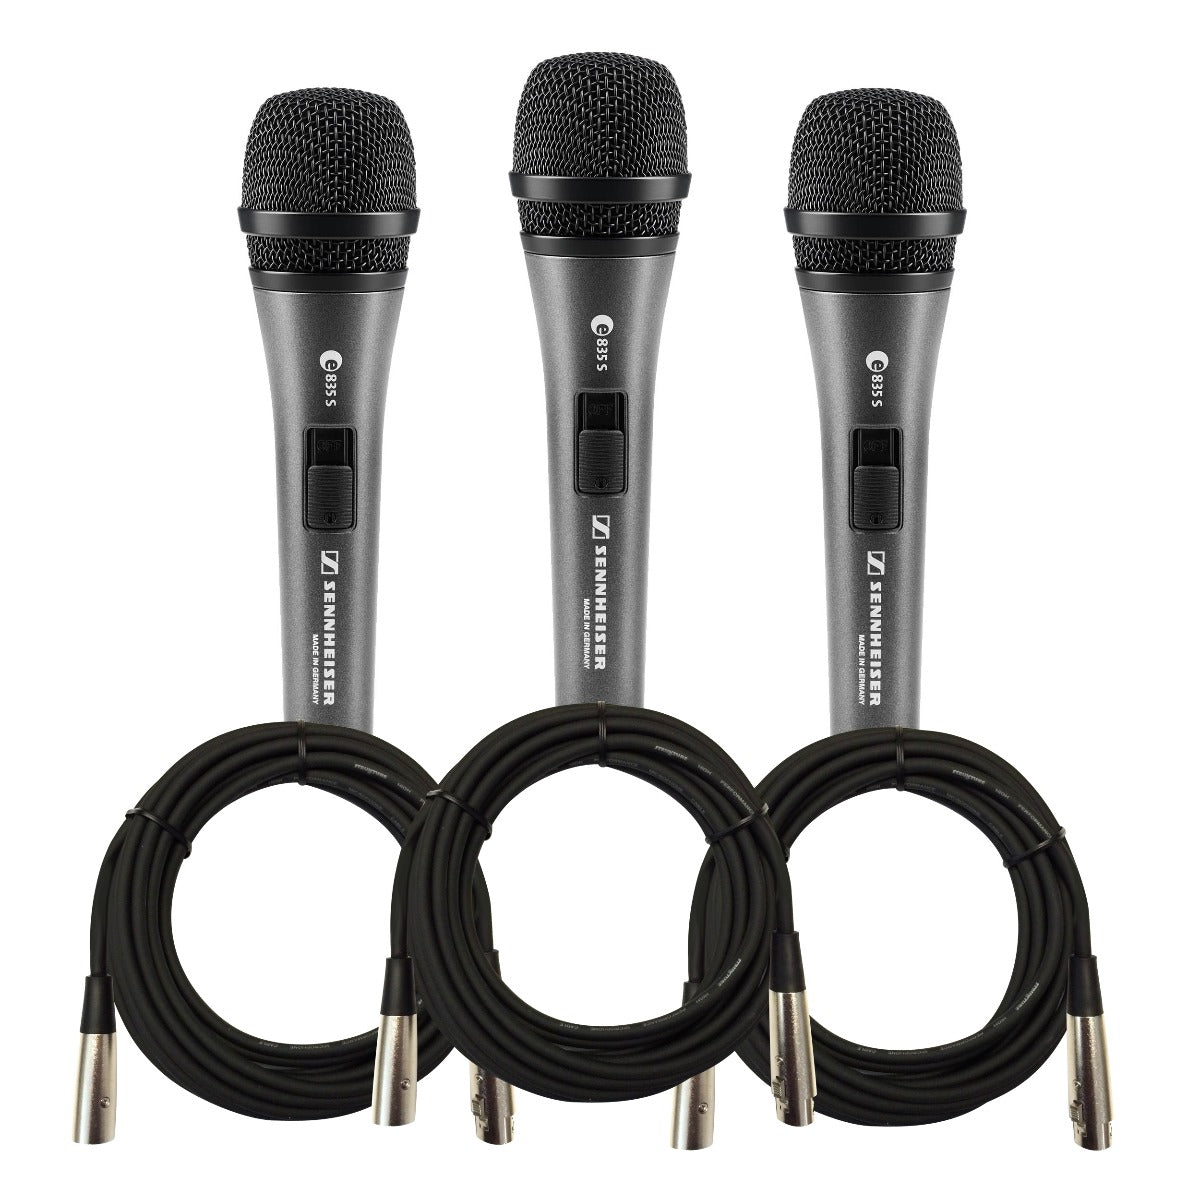 Sennheiser E 835-S Dynamic Vocal Microphone - 3 Pack CABLE KIT